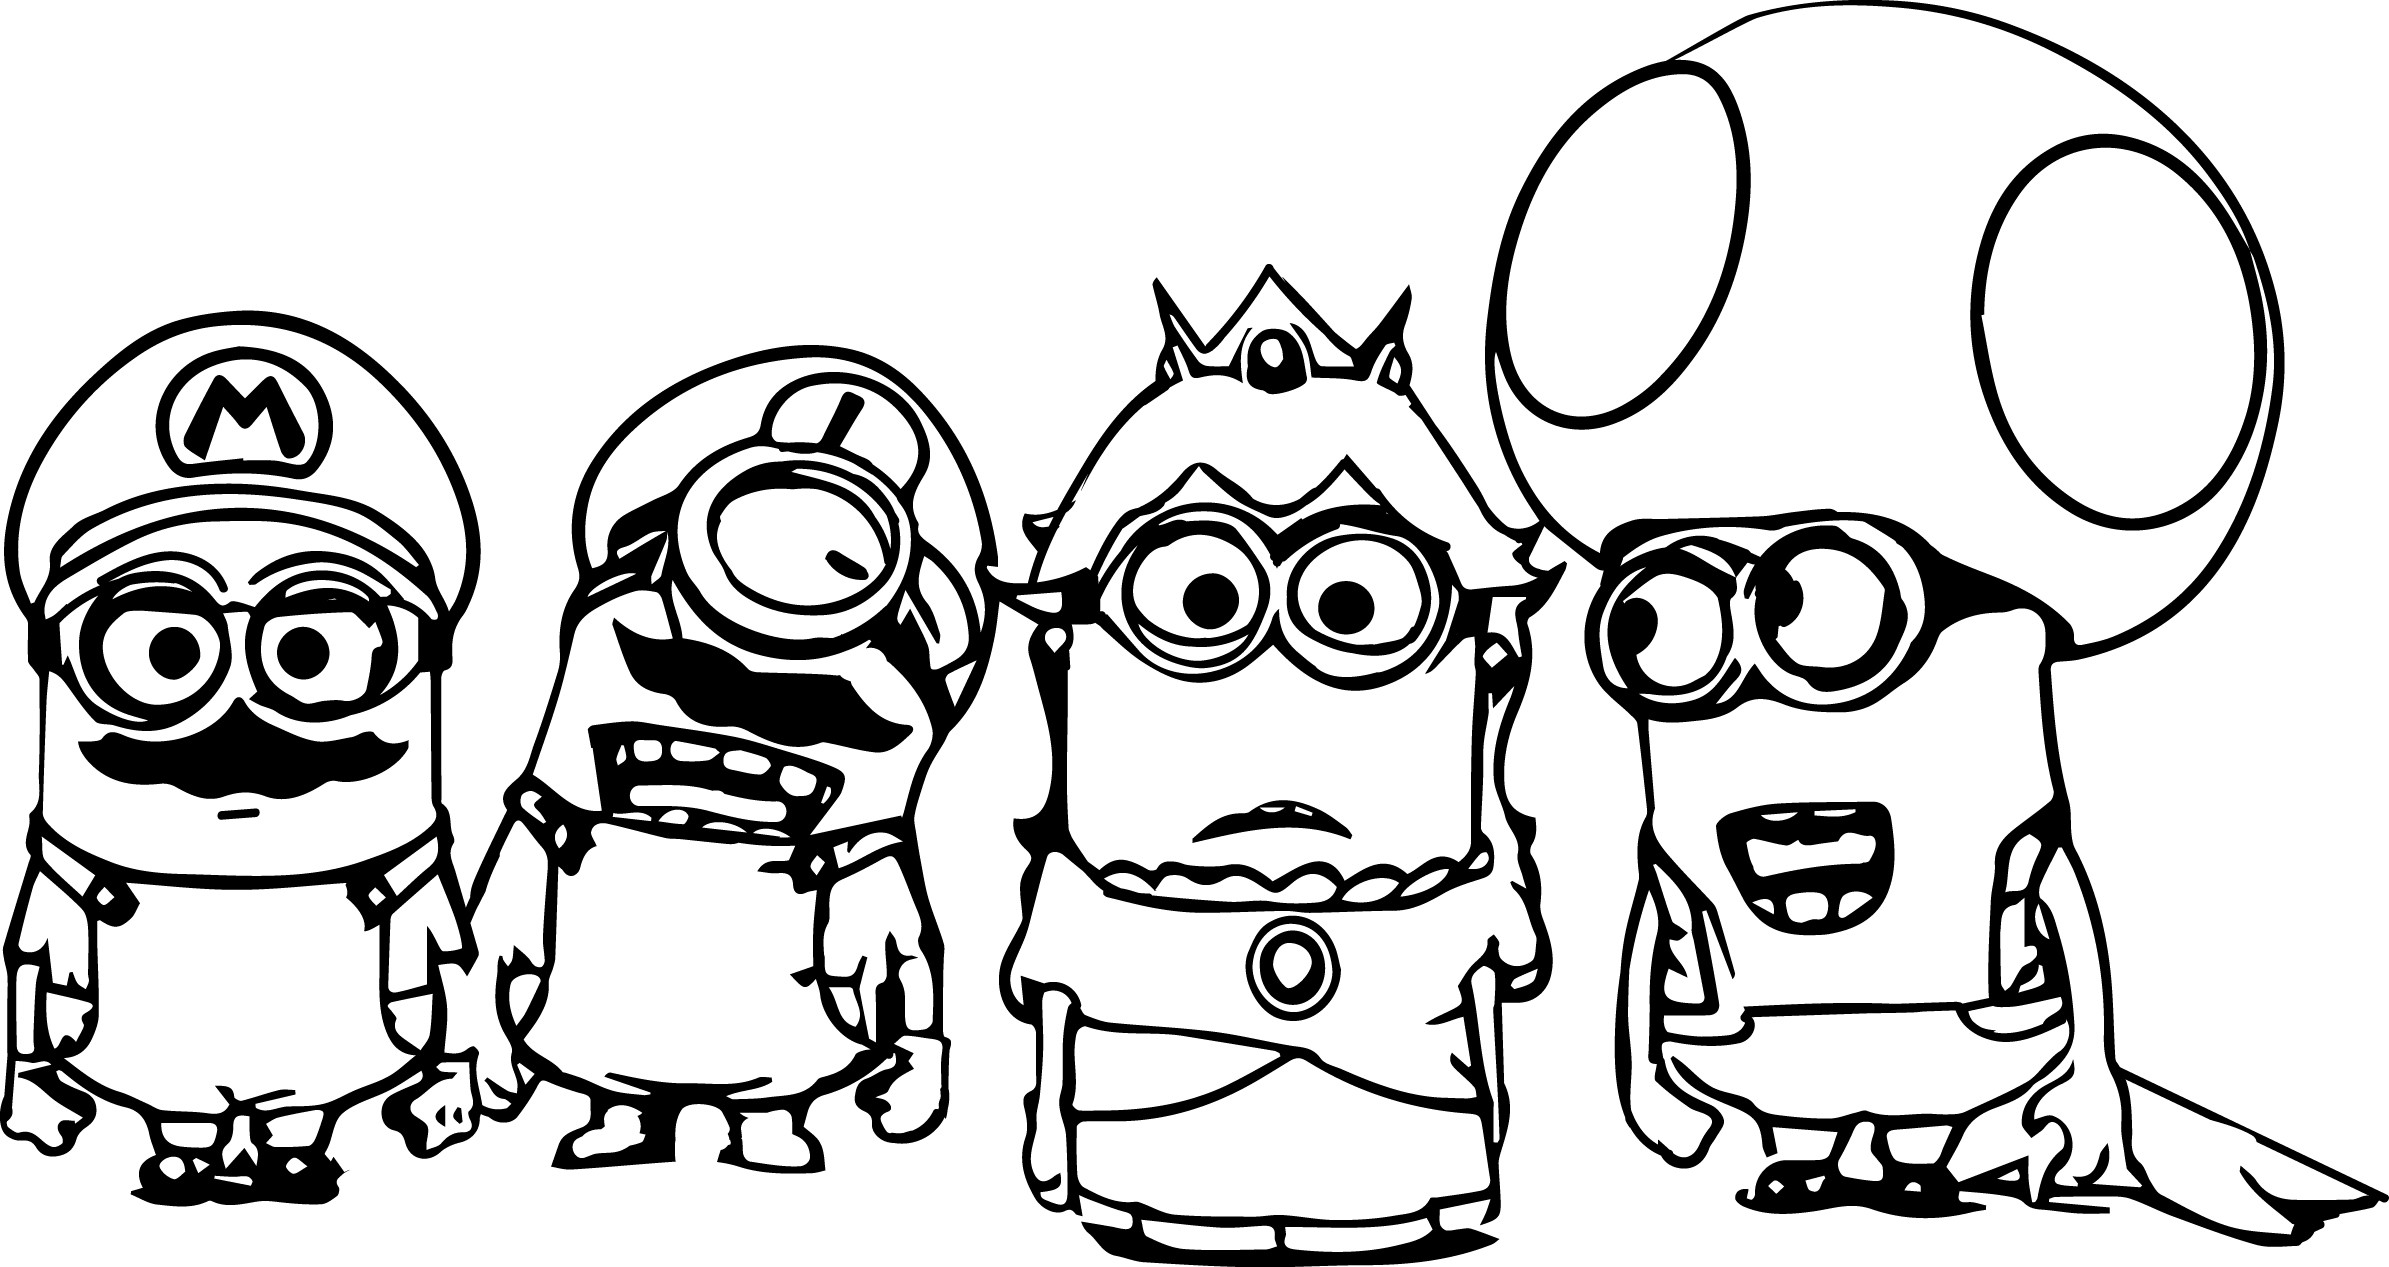 Minion Coloring Pages Pdf
 Free coloring pages of minion